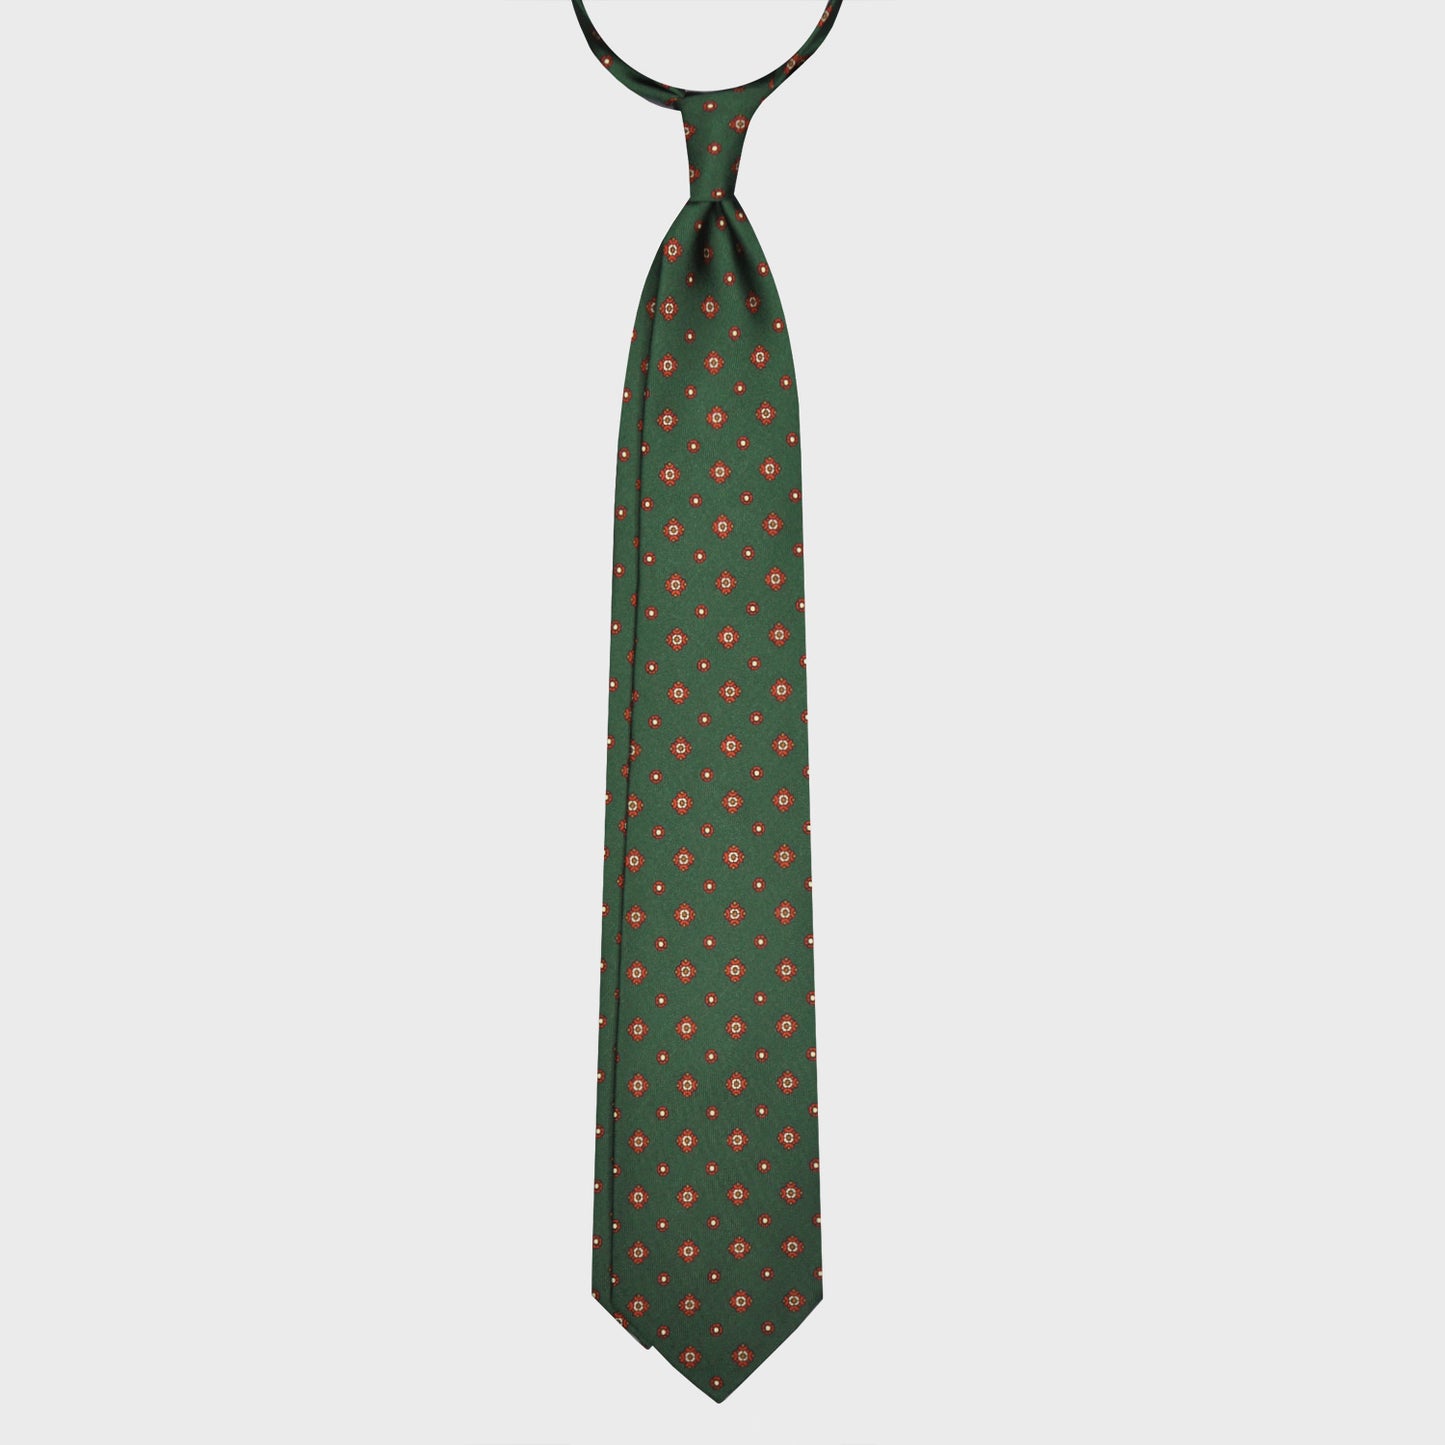 Load image into Gallery viewer, F.Marino Silk Tie 7 Folds Diamonds Forest Green-Wools Boutique Uomo
